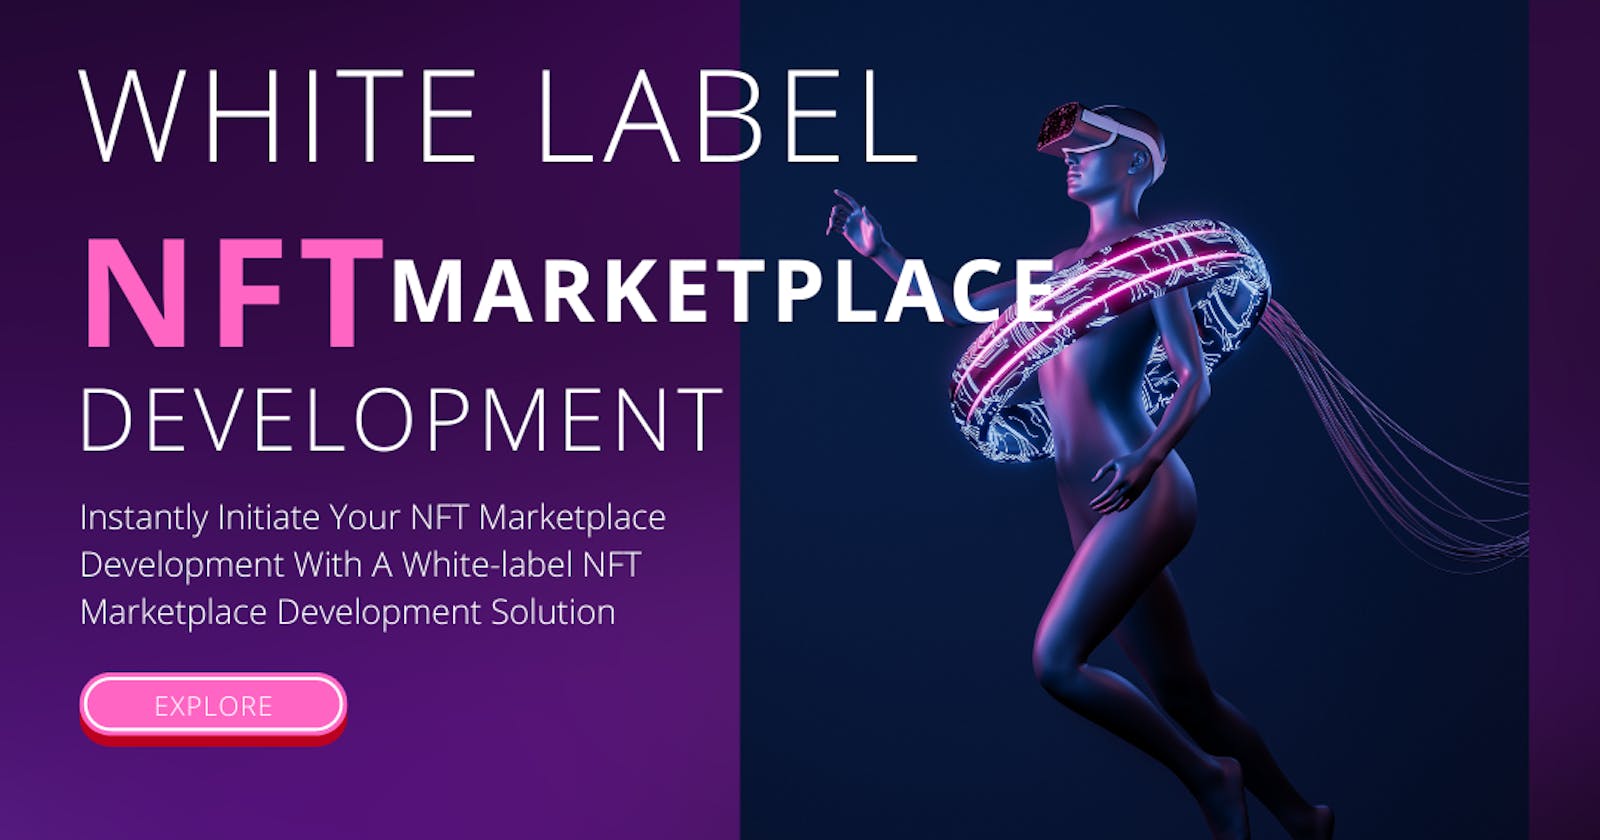 Launch White-label NFT Marketplaces With Budget-friendly Approach